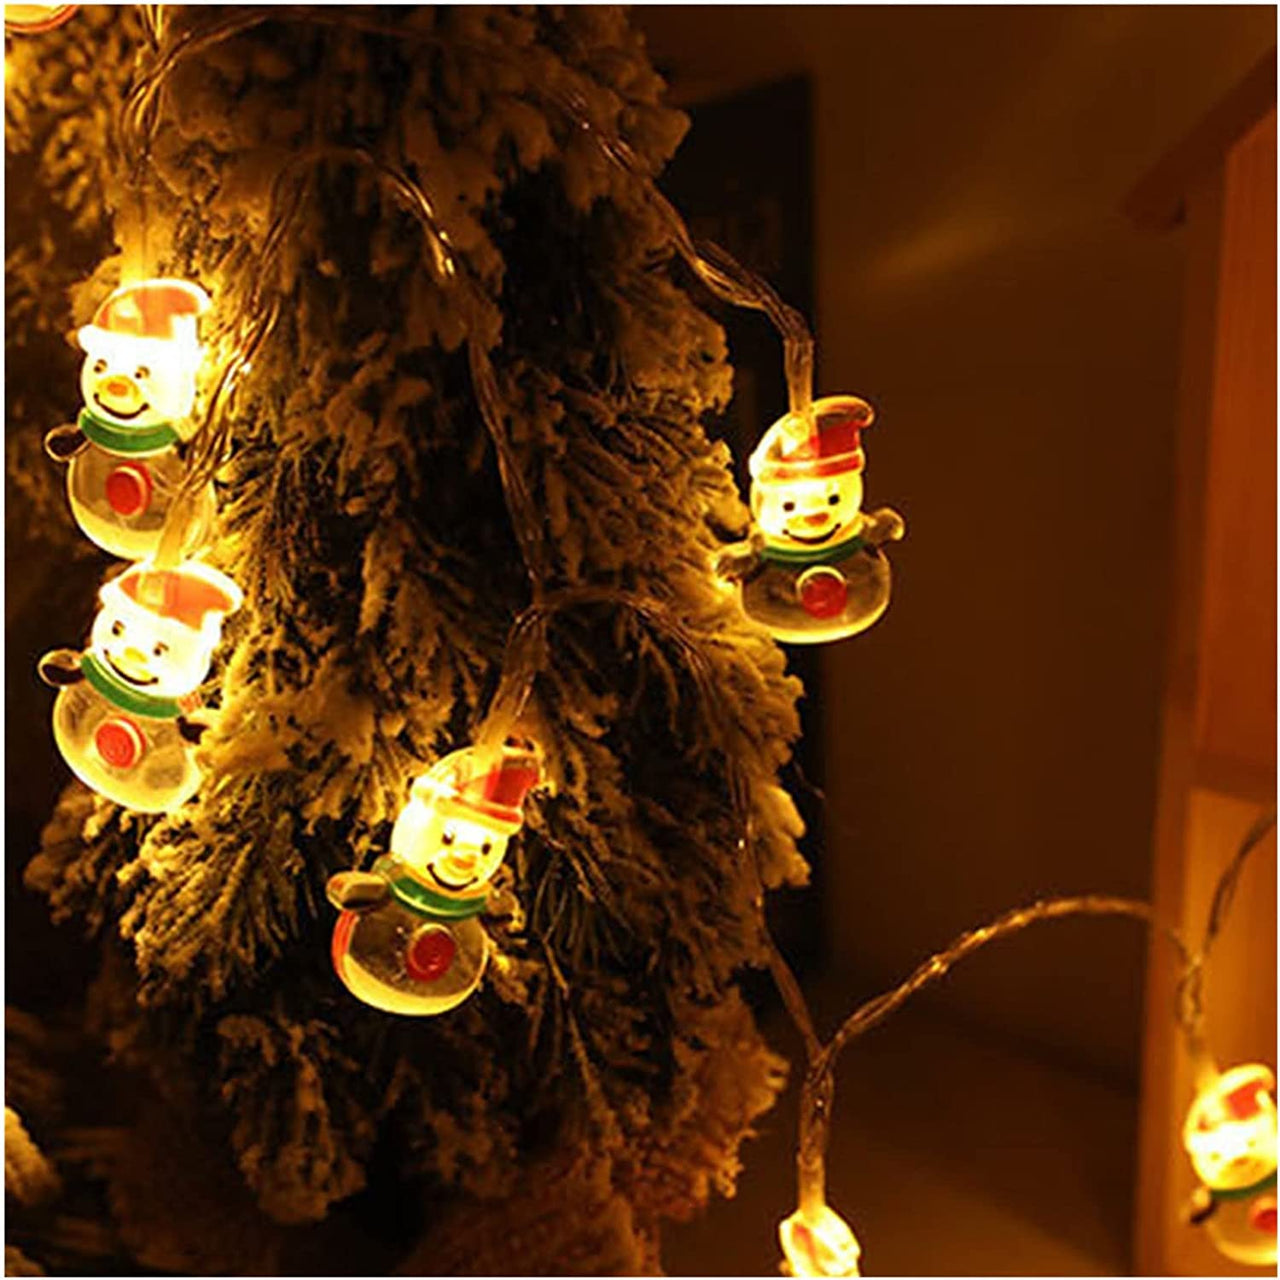 10ft 20 LEDs Christmas String Lights Waterproof Christmas Tree Santa Claus Snowman Christmas Decorations USB Operated for Home, Festival, Party Indoor Outdoor Christmas Ornaments